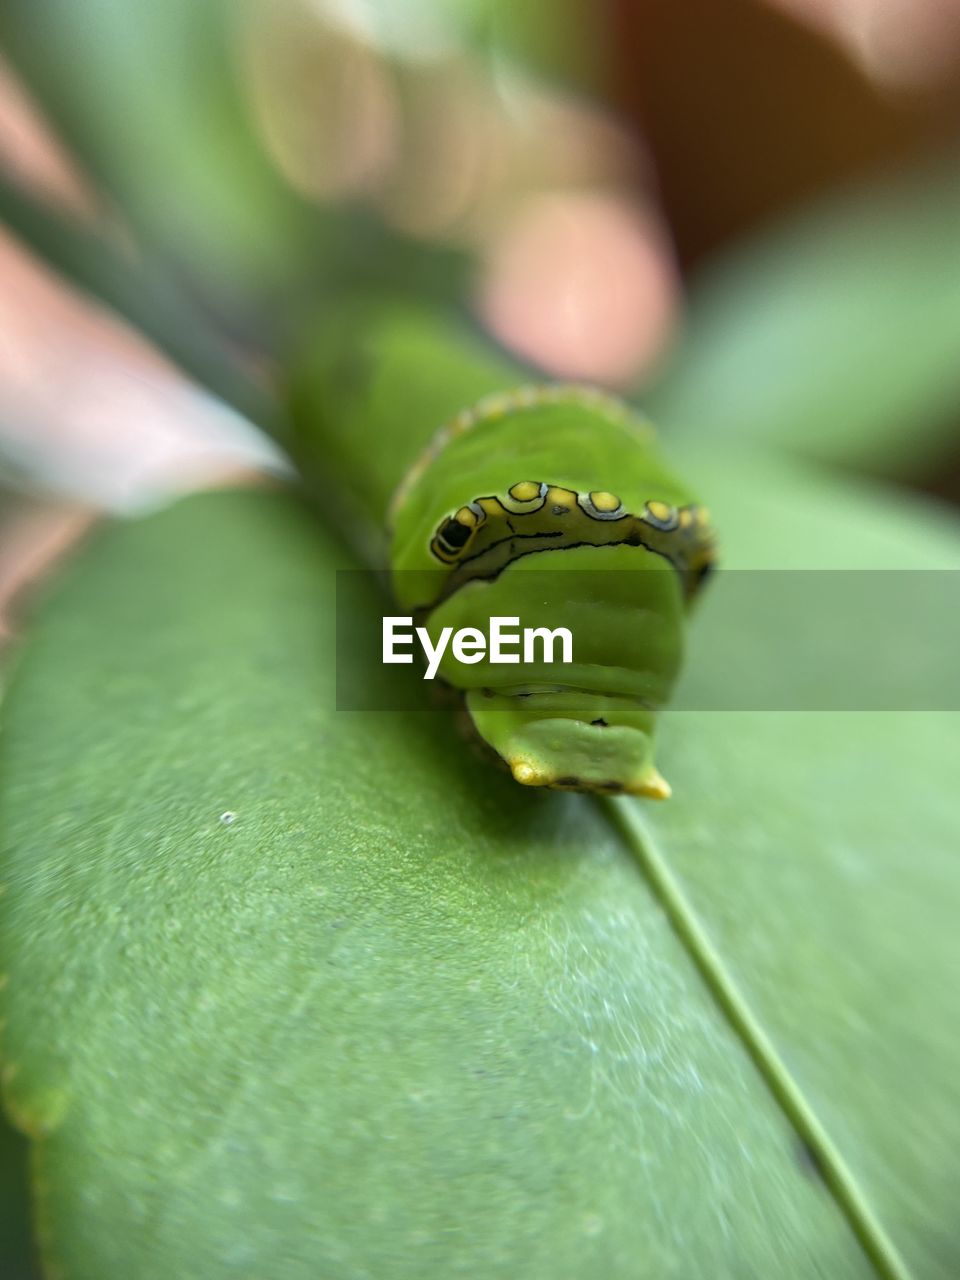 green, animal themes, close-up, animal, one animal, animal wildlife, macro photography, leaf, wildlife, plant part, yellow, insect, nature, flower, plant, hand, day, selective focus, focus on foreground, plant stem, outdoors, animal body part, beauty in nature, reptile, freshness